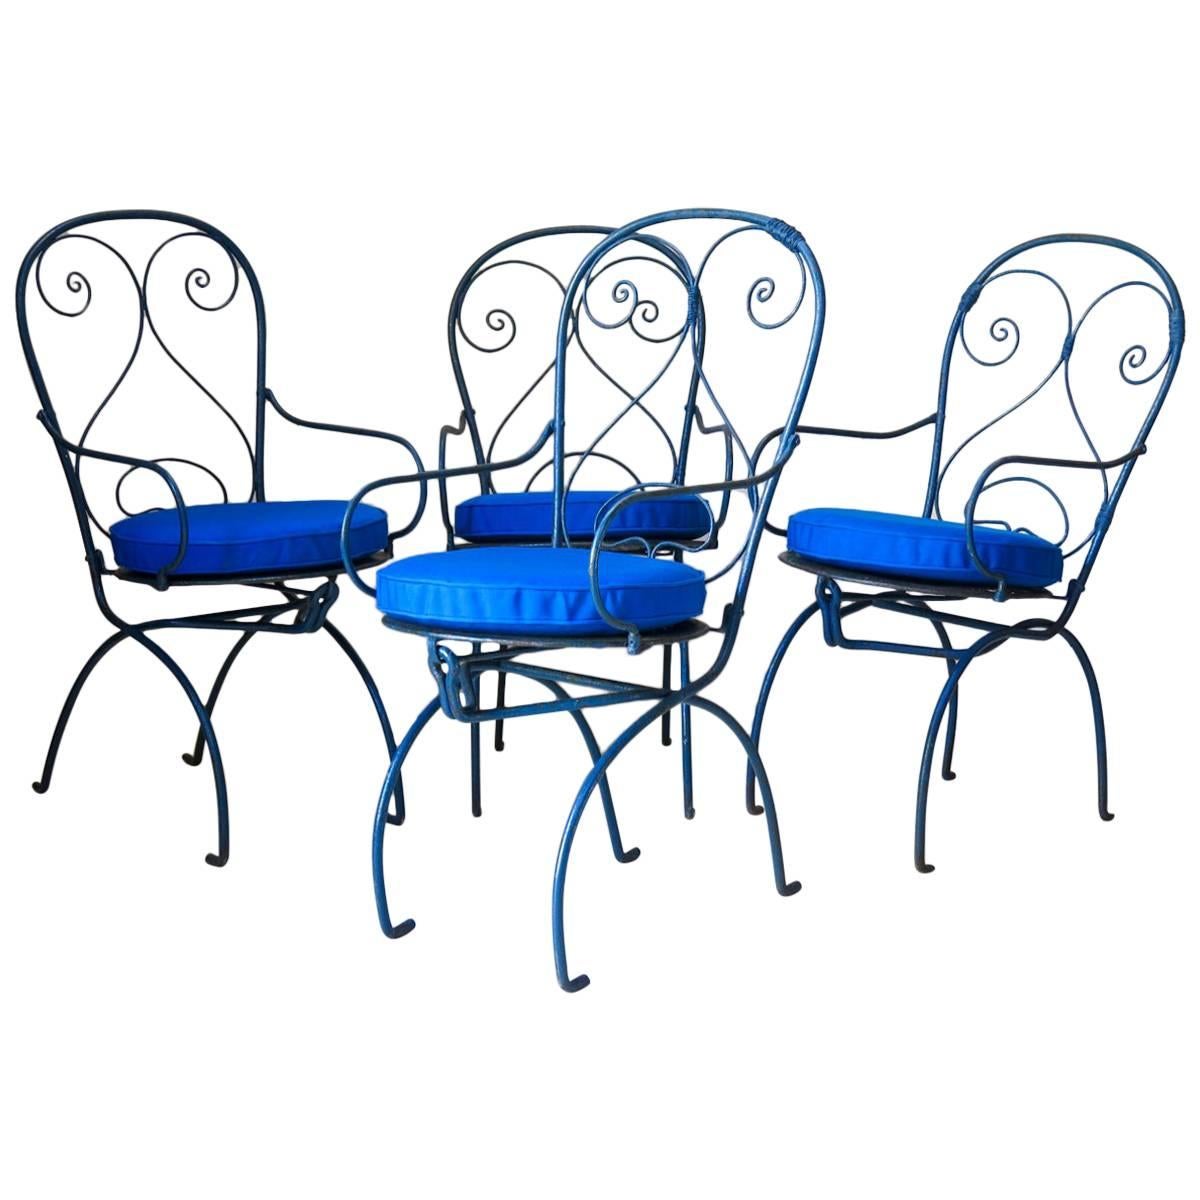 Set of Four Unusual Wrought-Iron Garden Chairs, France, circa 1920s For Sale